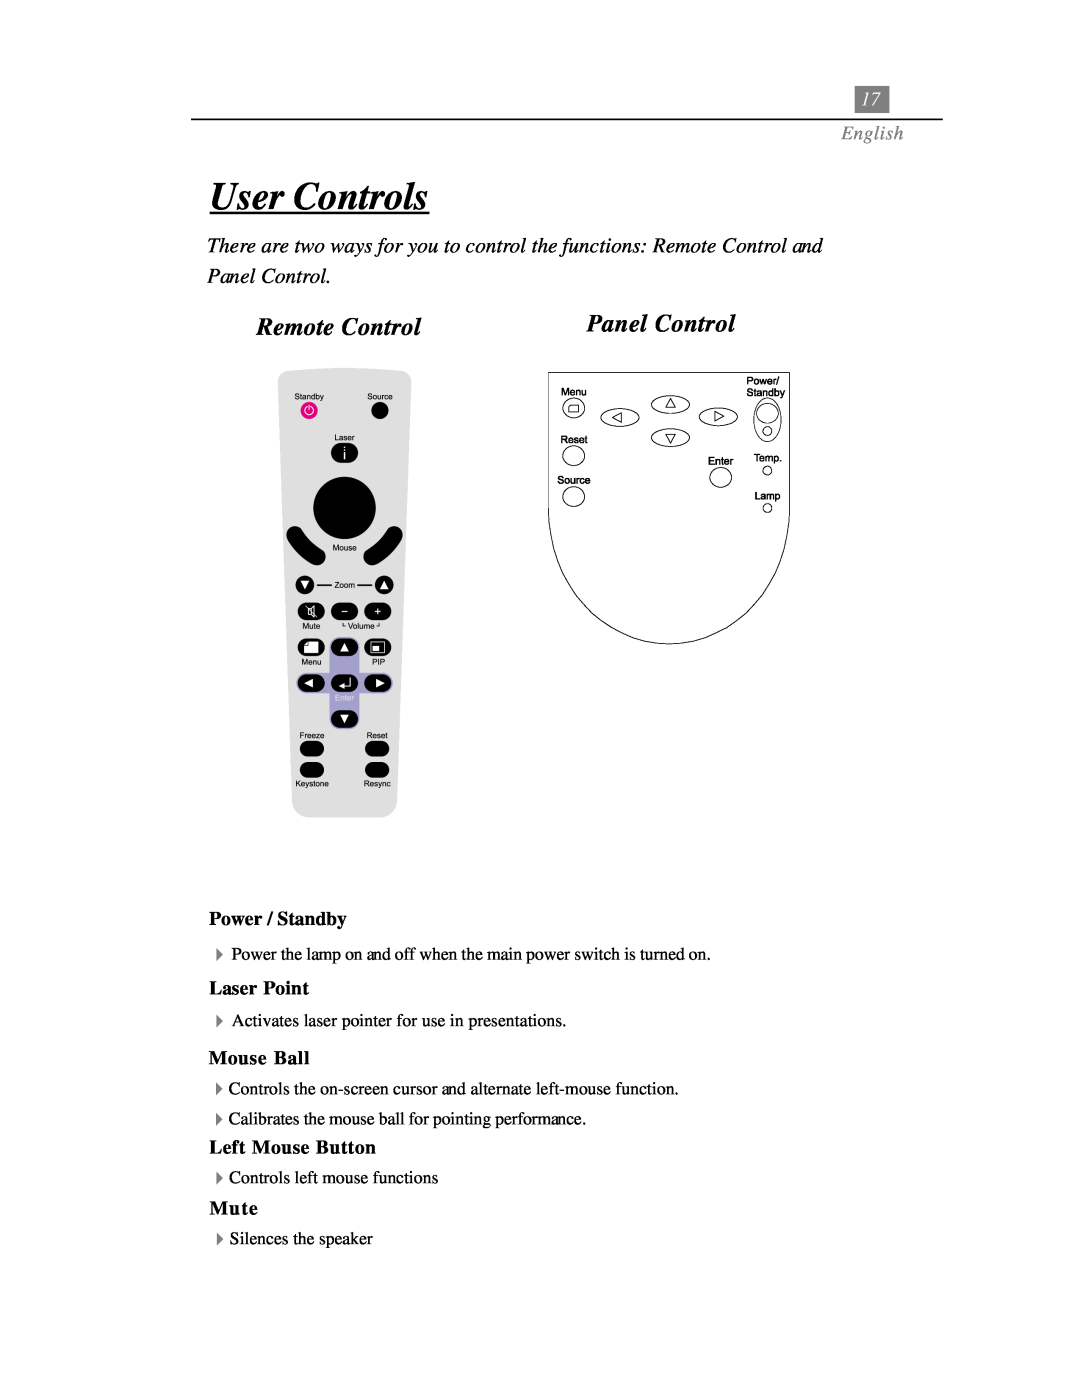 Optoma Technology EP718 specifications User Controls, Remote Control, Panel Control, English 